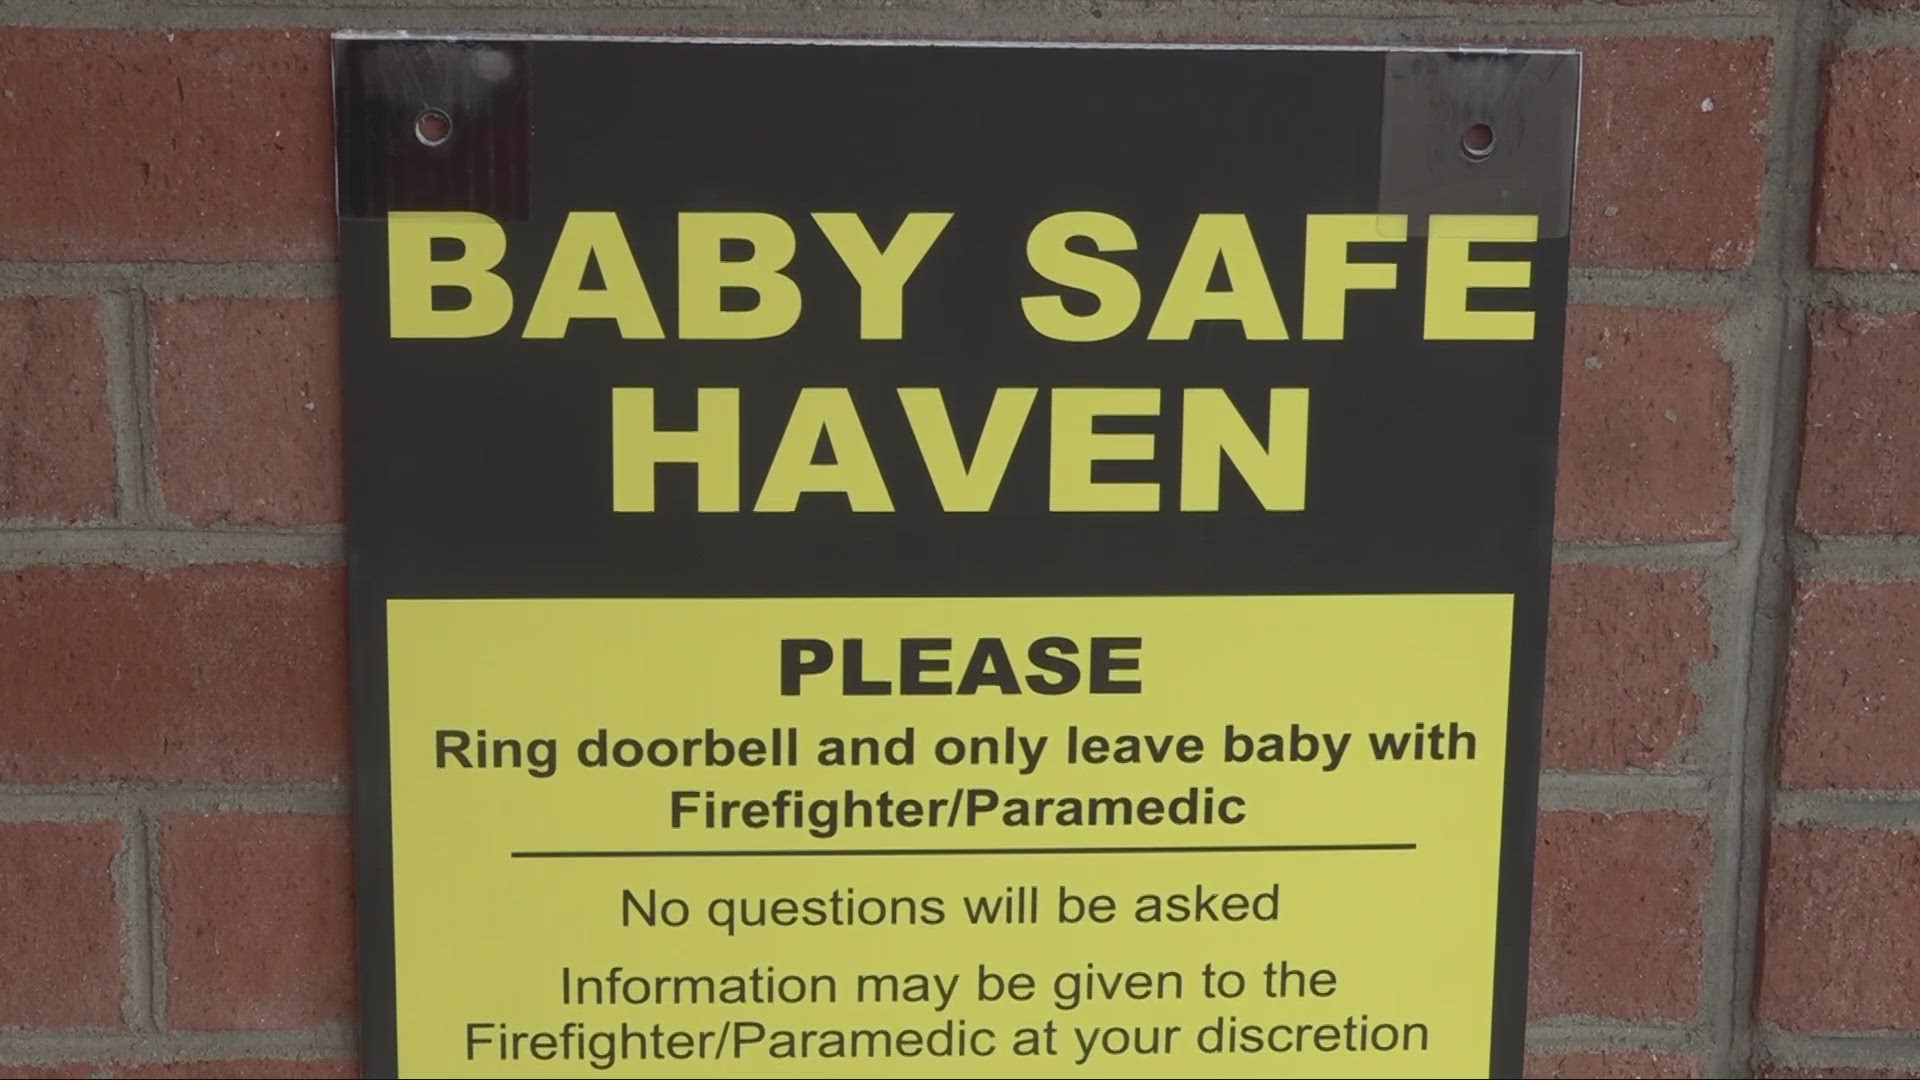 A parent of a newborn under 30 days old can ring the doorbell at the fire station and surrender their child, who will be placed in an adoptive home.